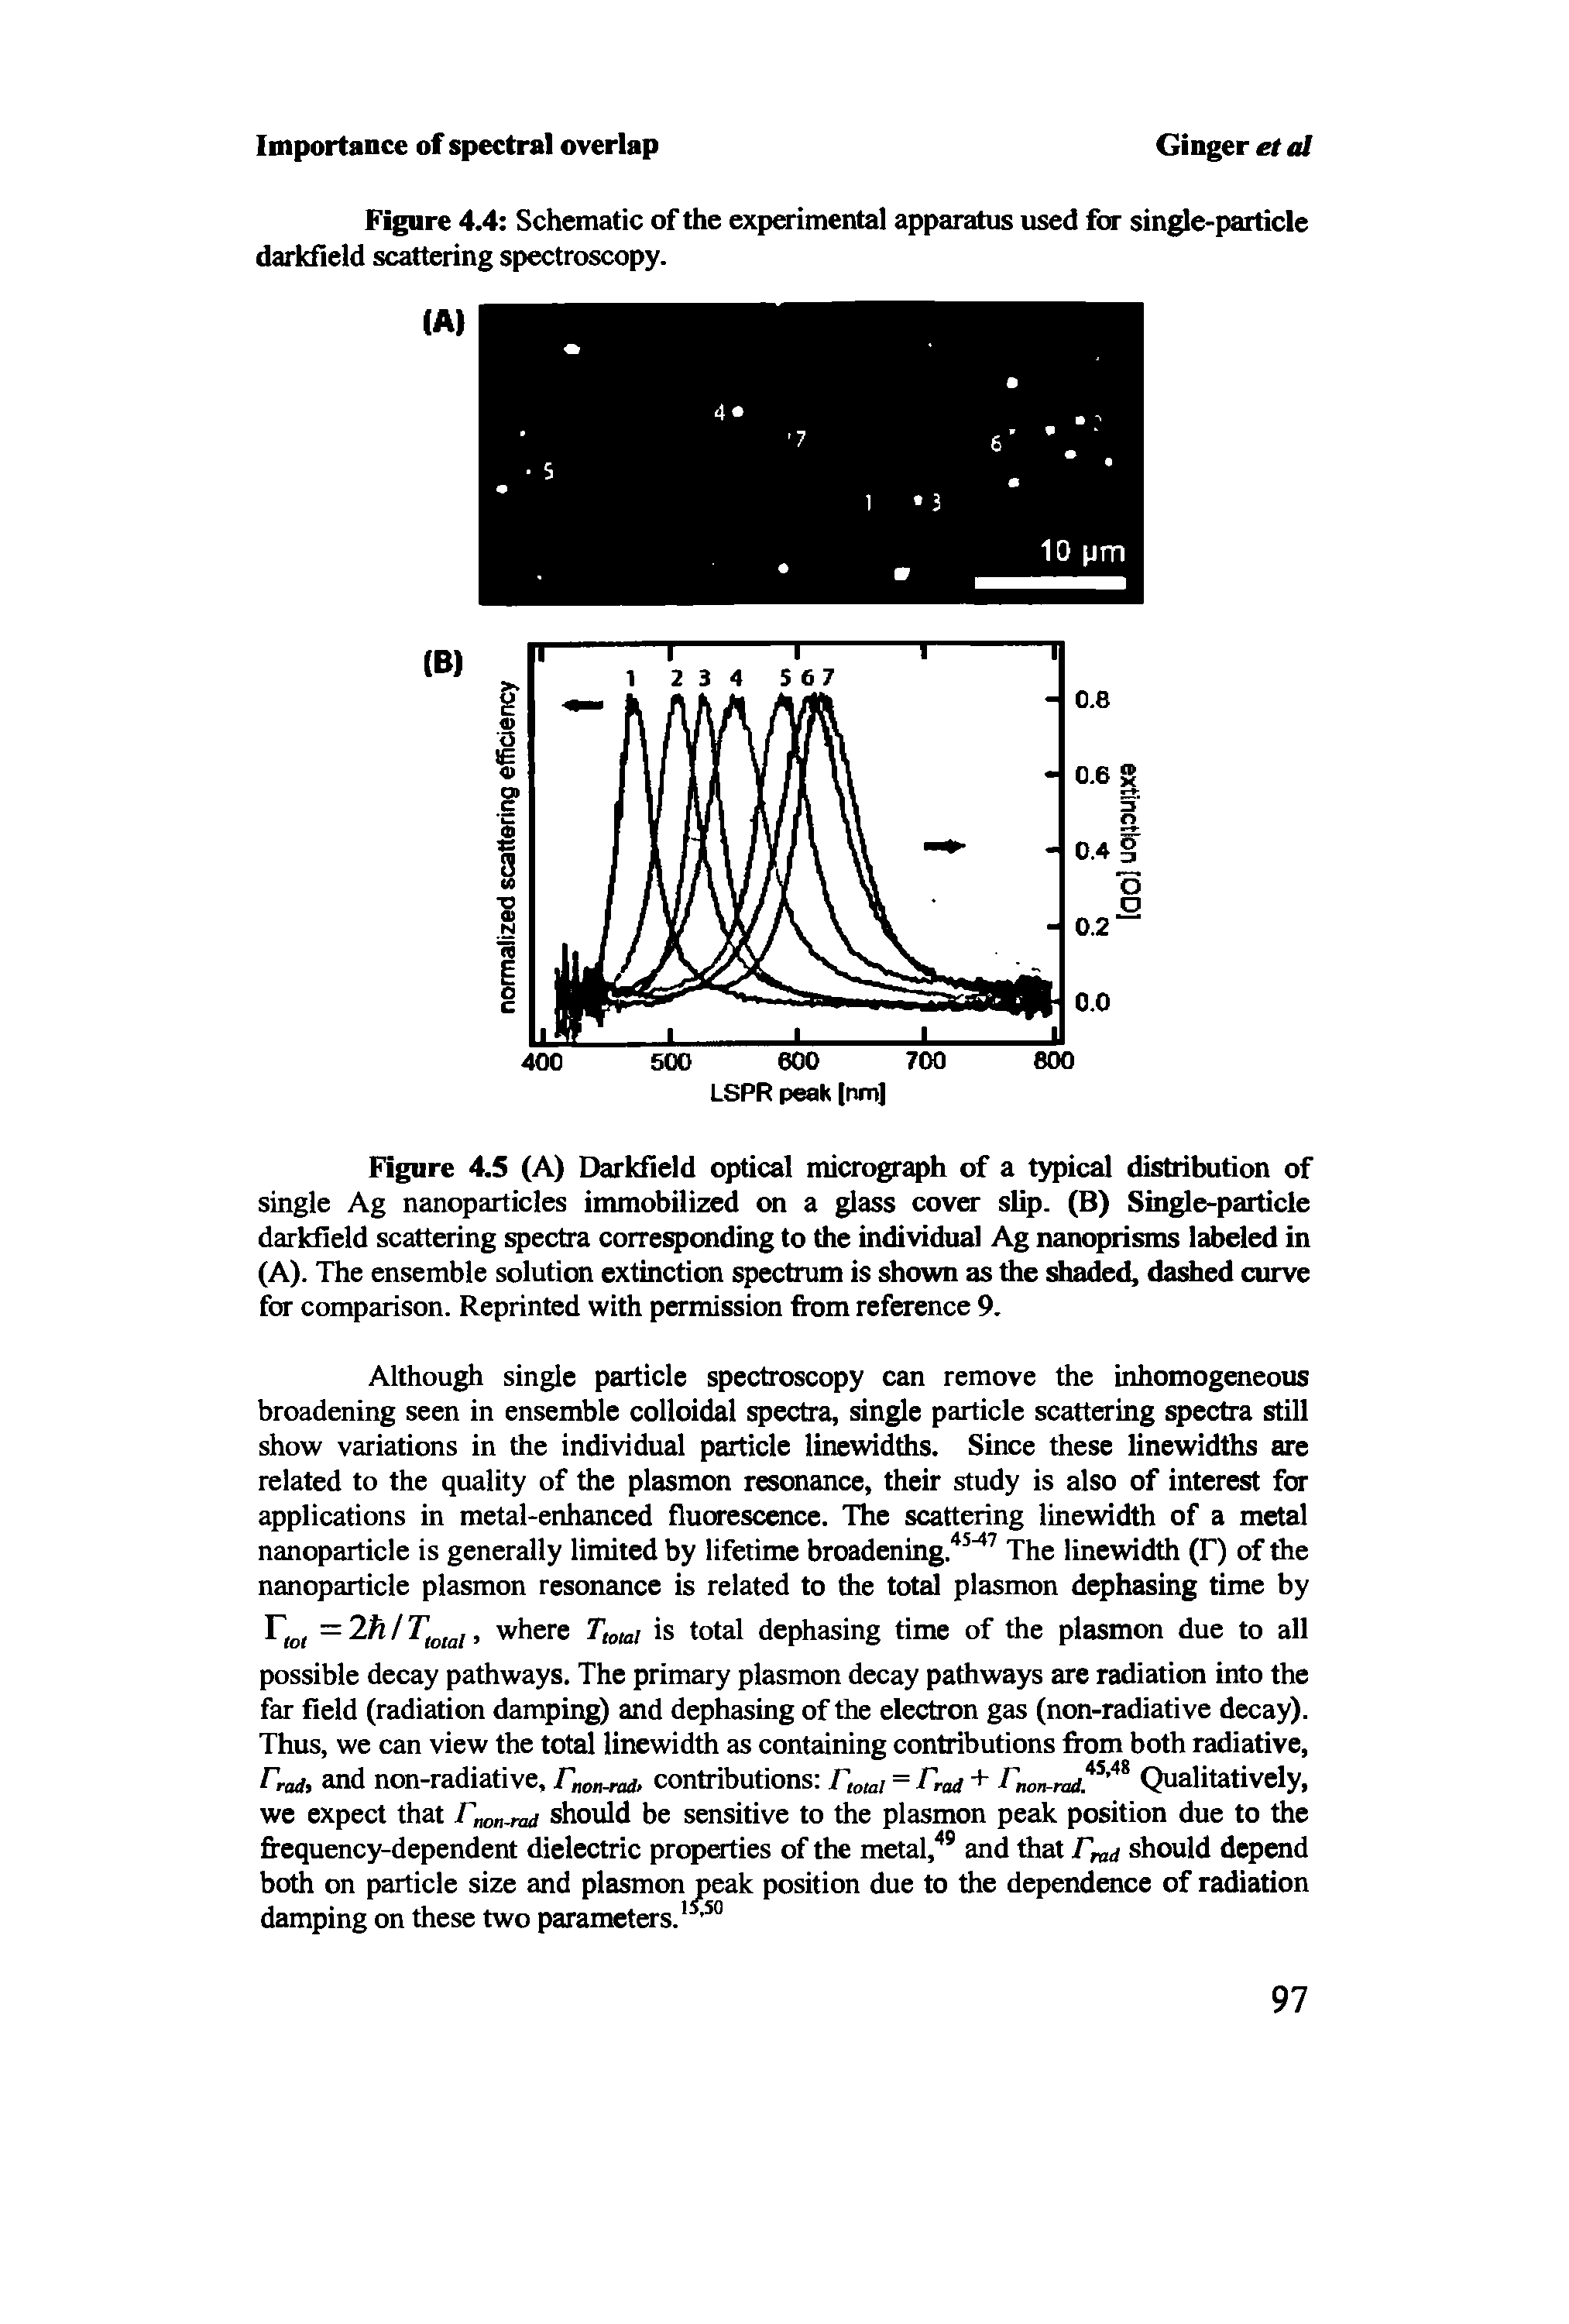 Figure 4.5 (A) Darkfield optical micrograph of a typical distribution of single Ag nanoparticles immobilized on a glass cover slip. (B) Single-particle darkfield scattering spectra corresponding to the individual Ag nanoprisms labeled in (A). The ensemble solution extinction spectrum is shown as the shaded, dashed curve for comparison. Reprinted with permission from reference 9.